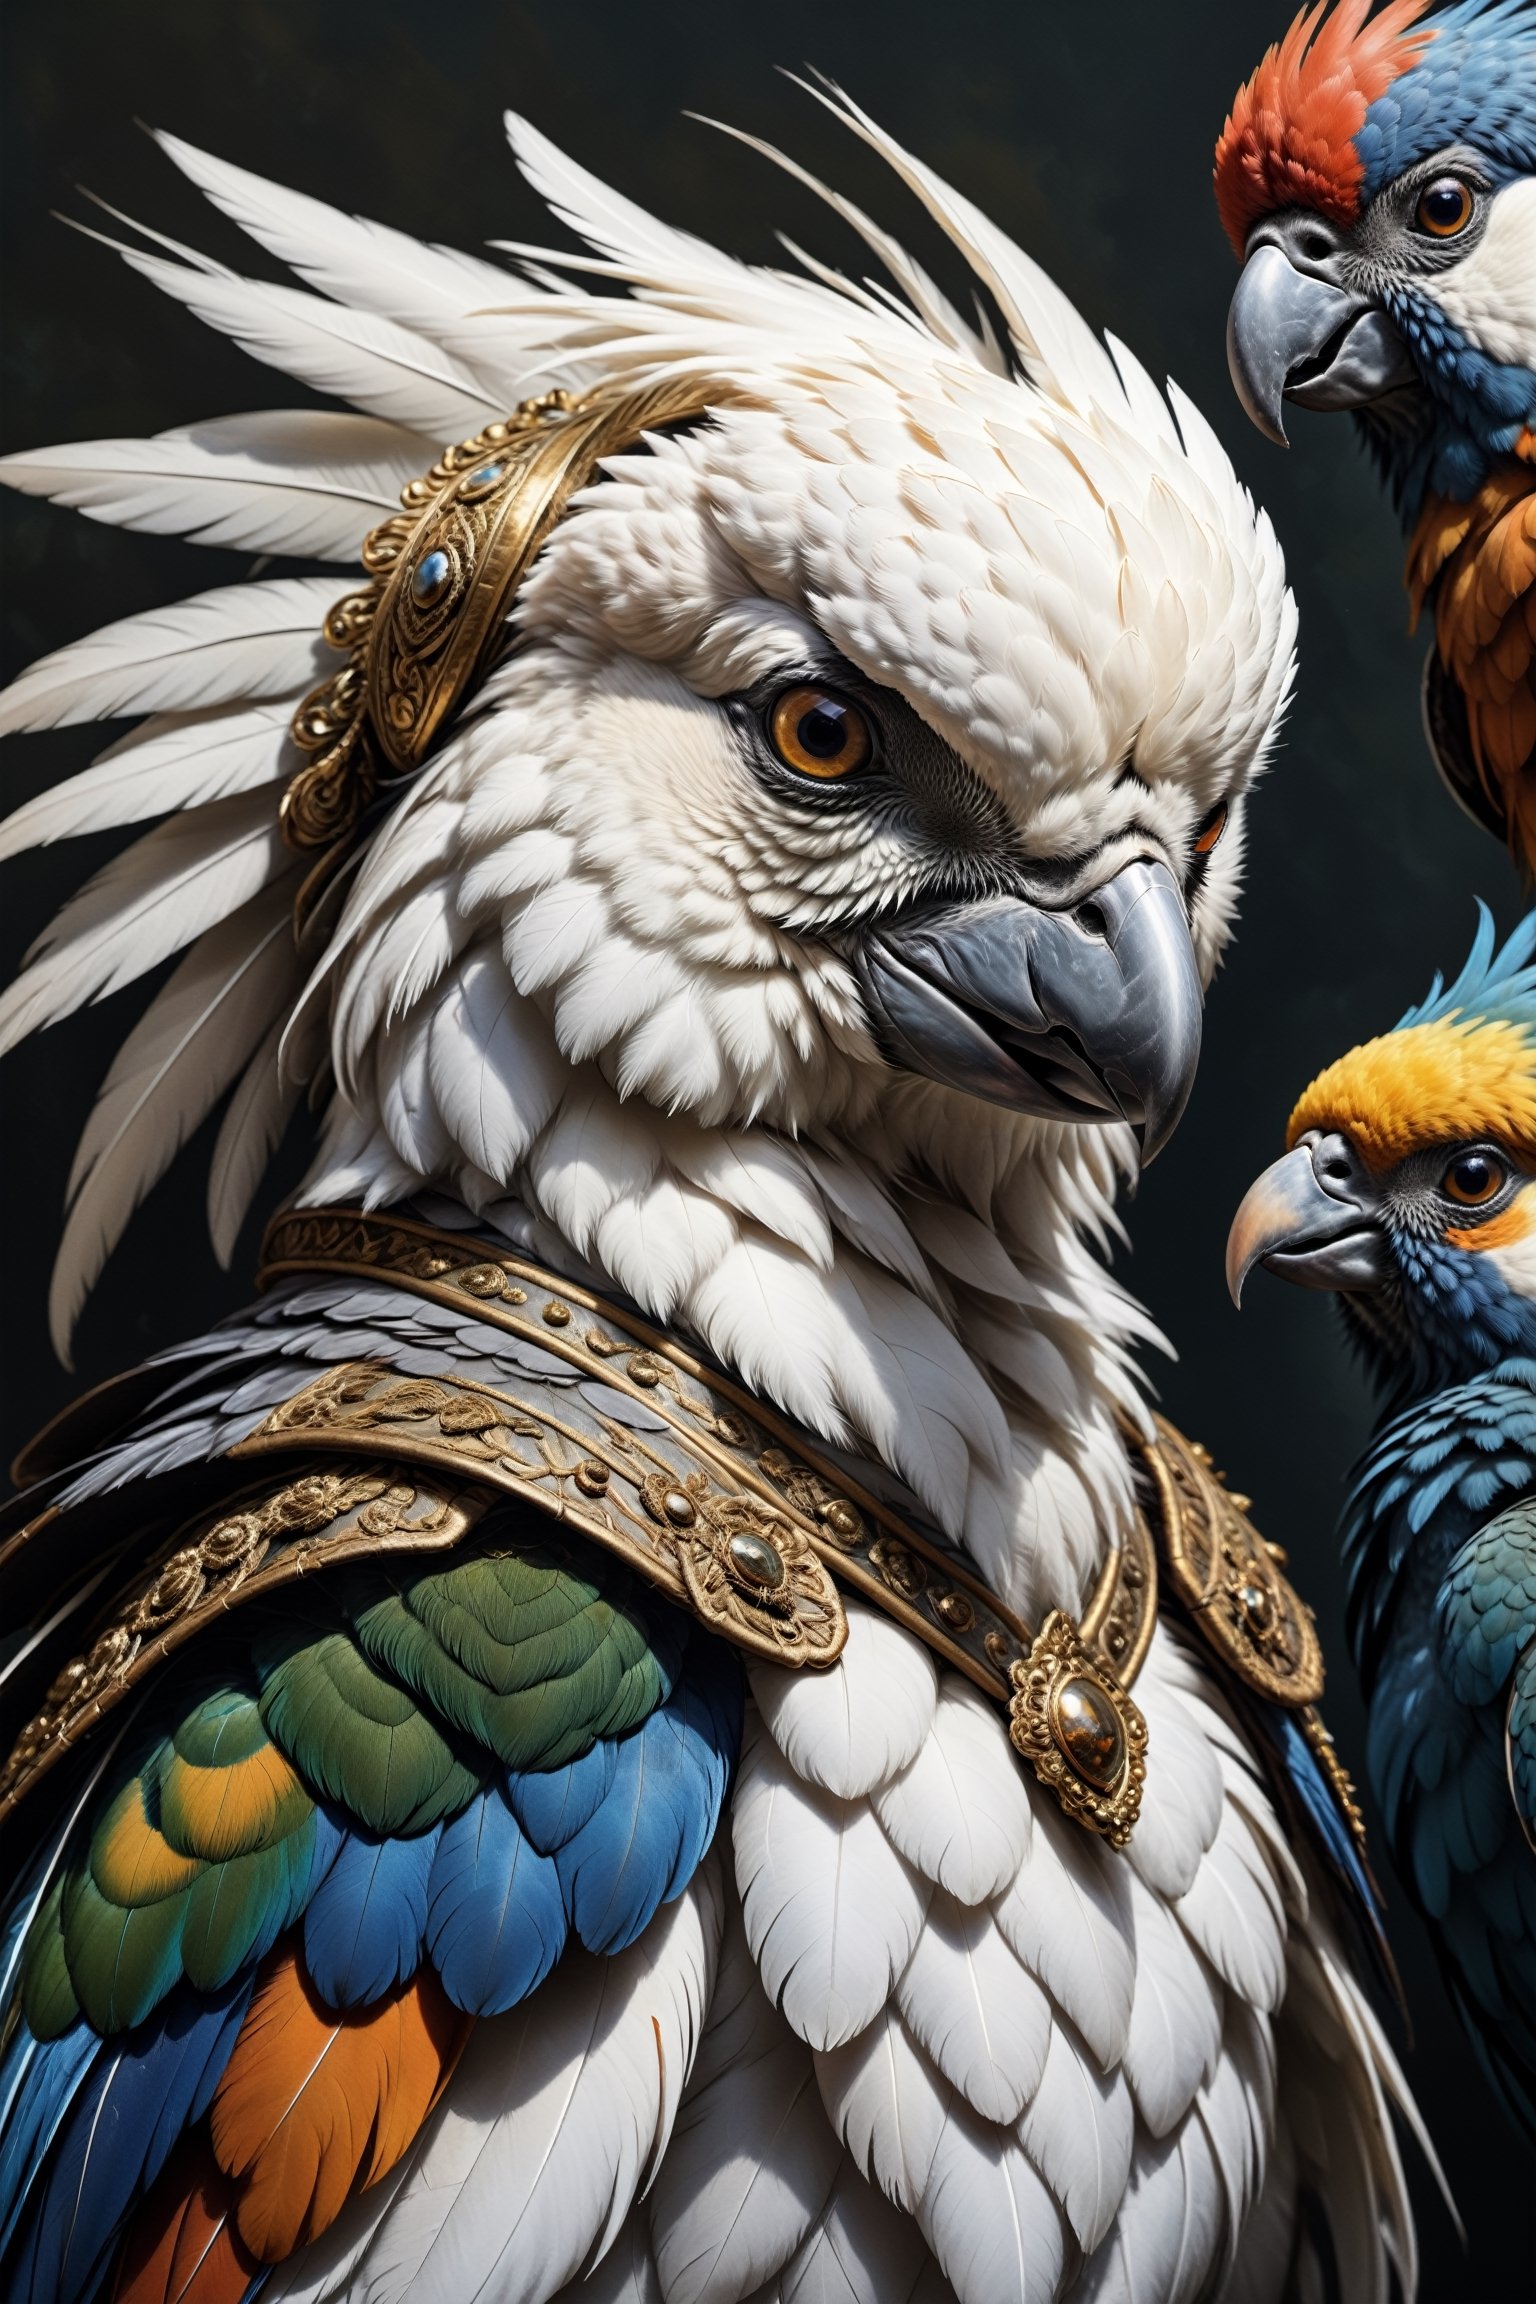 peacocks, tiger stripes,white cockatoo, baroque style, art by sergio toppi, art design by sergio toppi, military poster style, ,more detail XL,close up,Oil painting, 8k, highly detailed, in the style of esao andrews, a clse up oil portrait of a beautiful group of birds, 